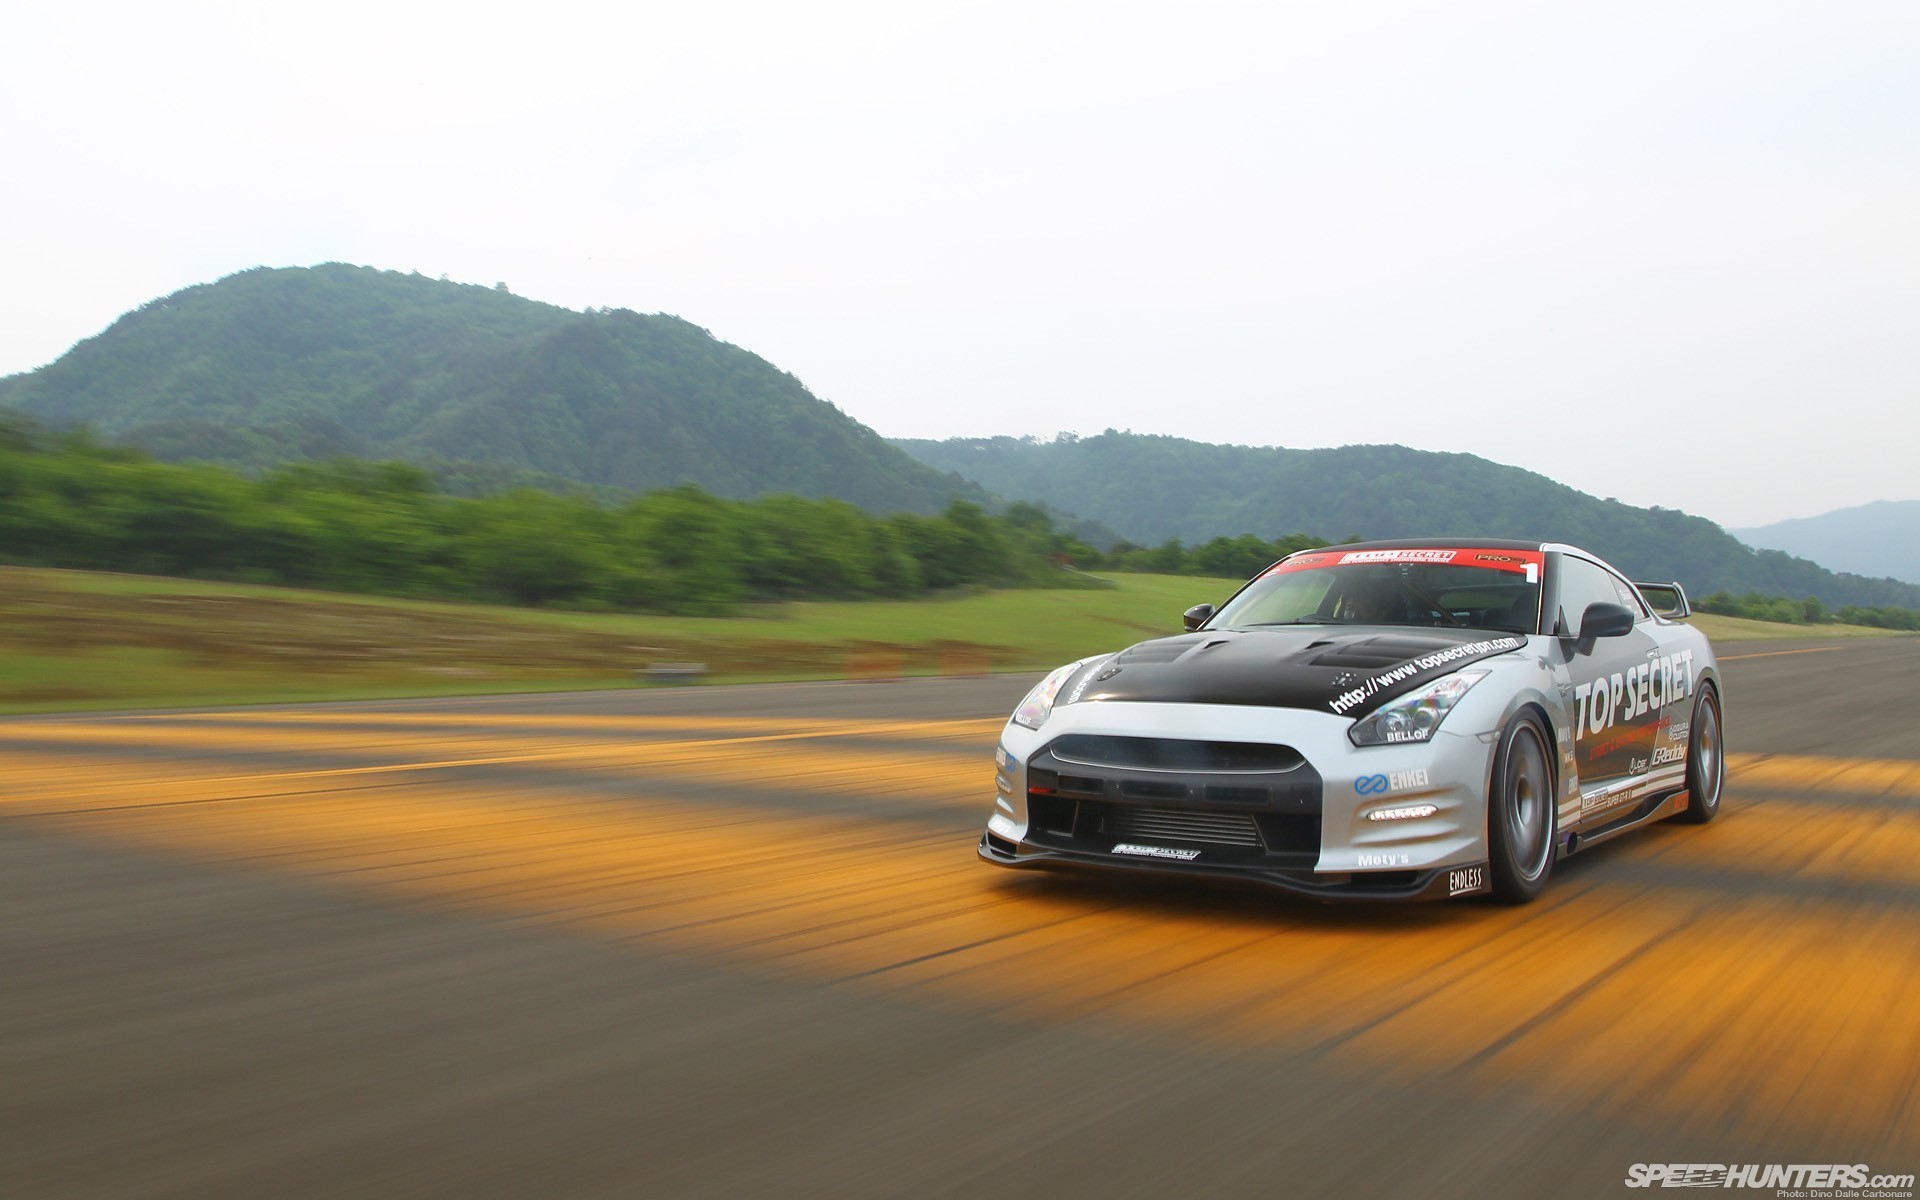 General 1920x1200 car silver cars Speedhunters racing vehicle Nissan Nissan GT-R Japanese cars